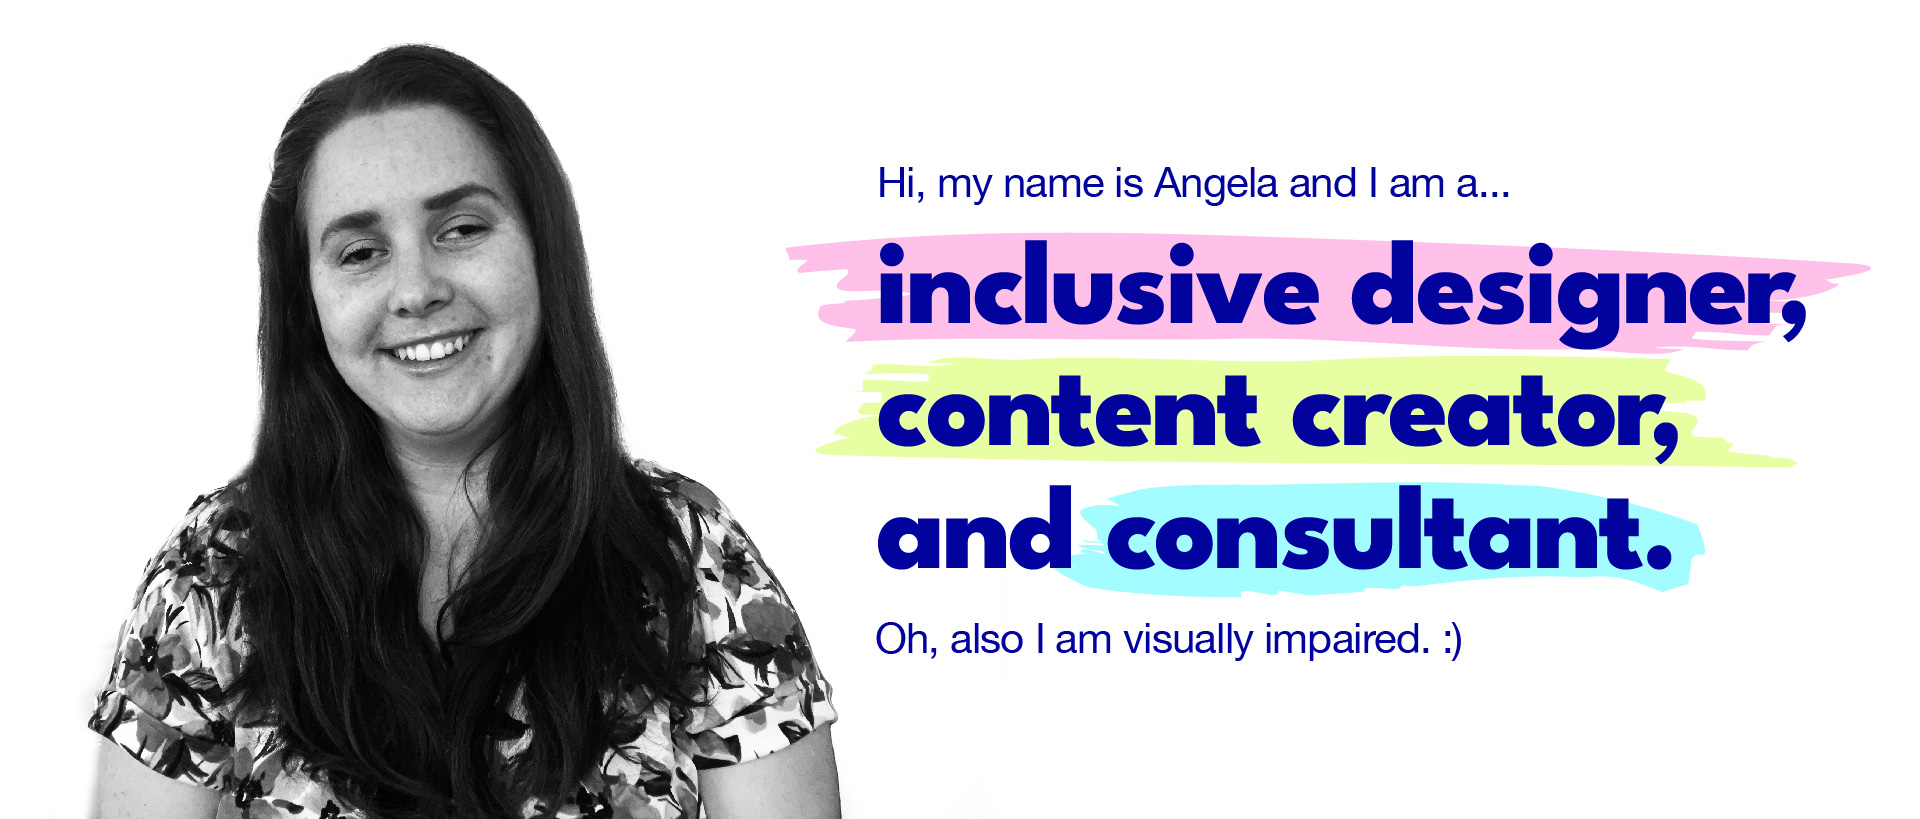 Hi, my name is Angela and I am a...inclusive designer, content creator and consultant.